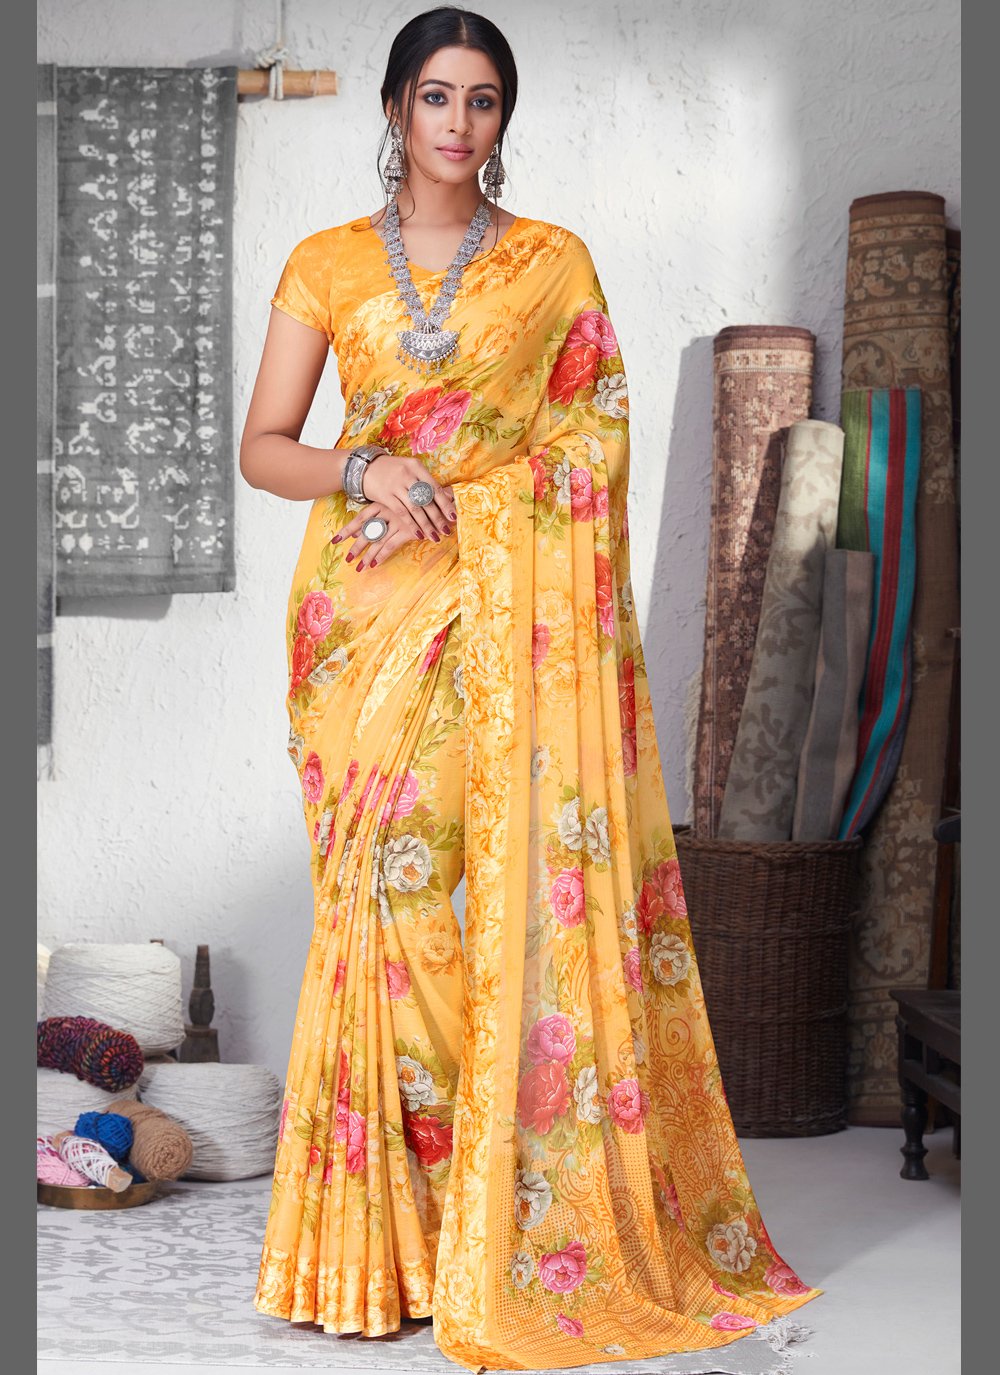 15 Trending Designs of Floral Sarees for Beautiful Look